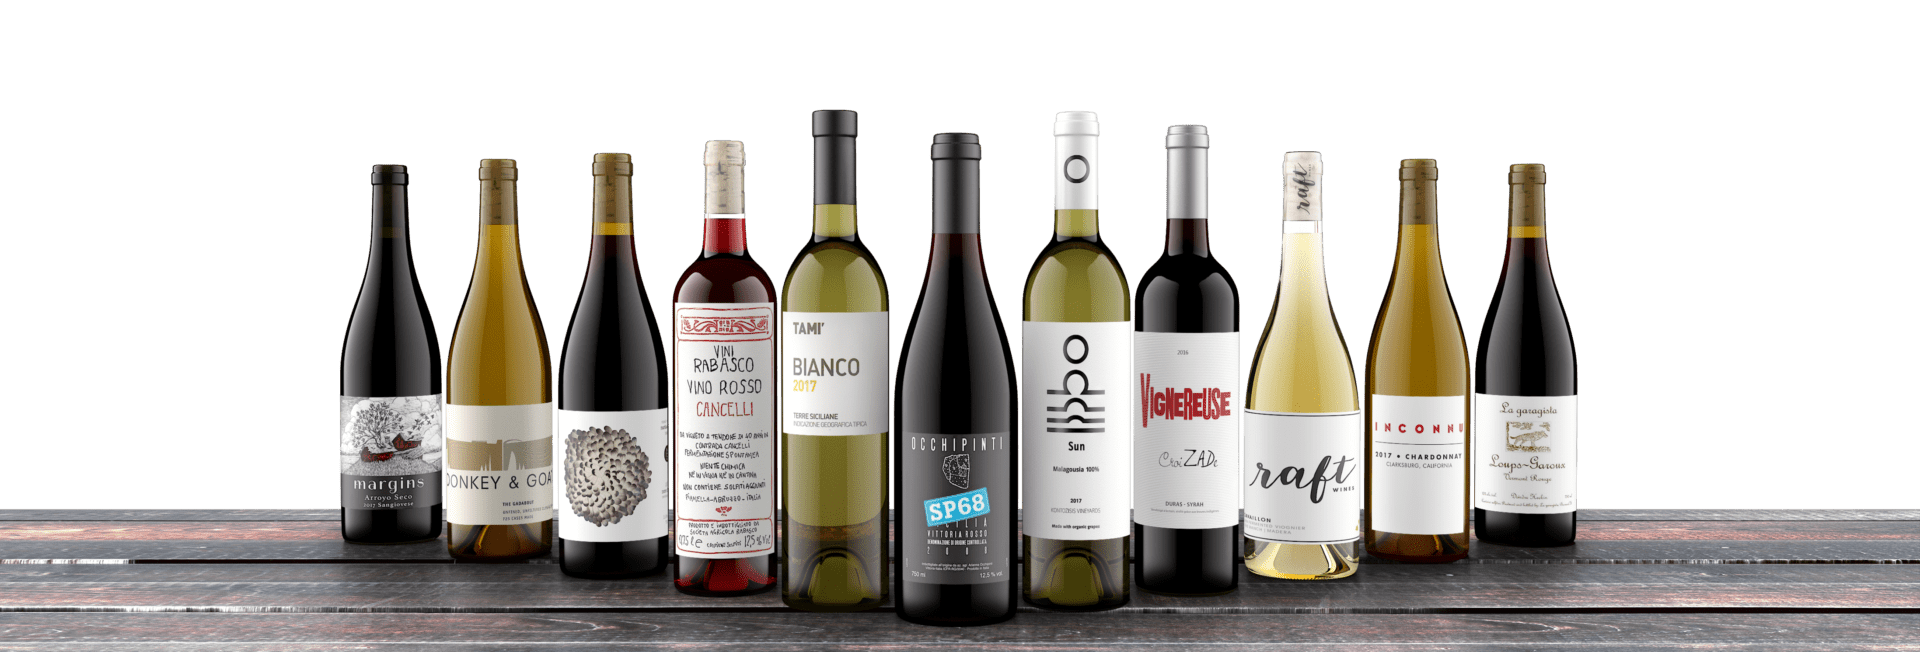 outshinery rawvino 11bottle group wide ontrans 1